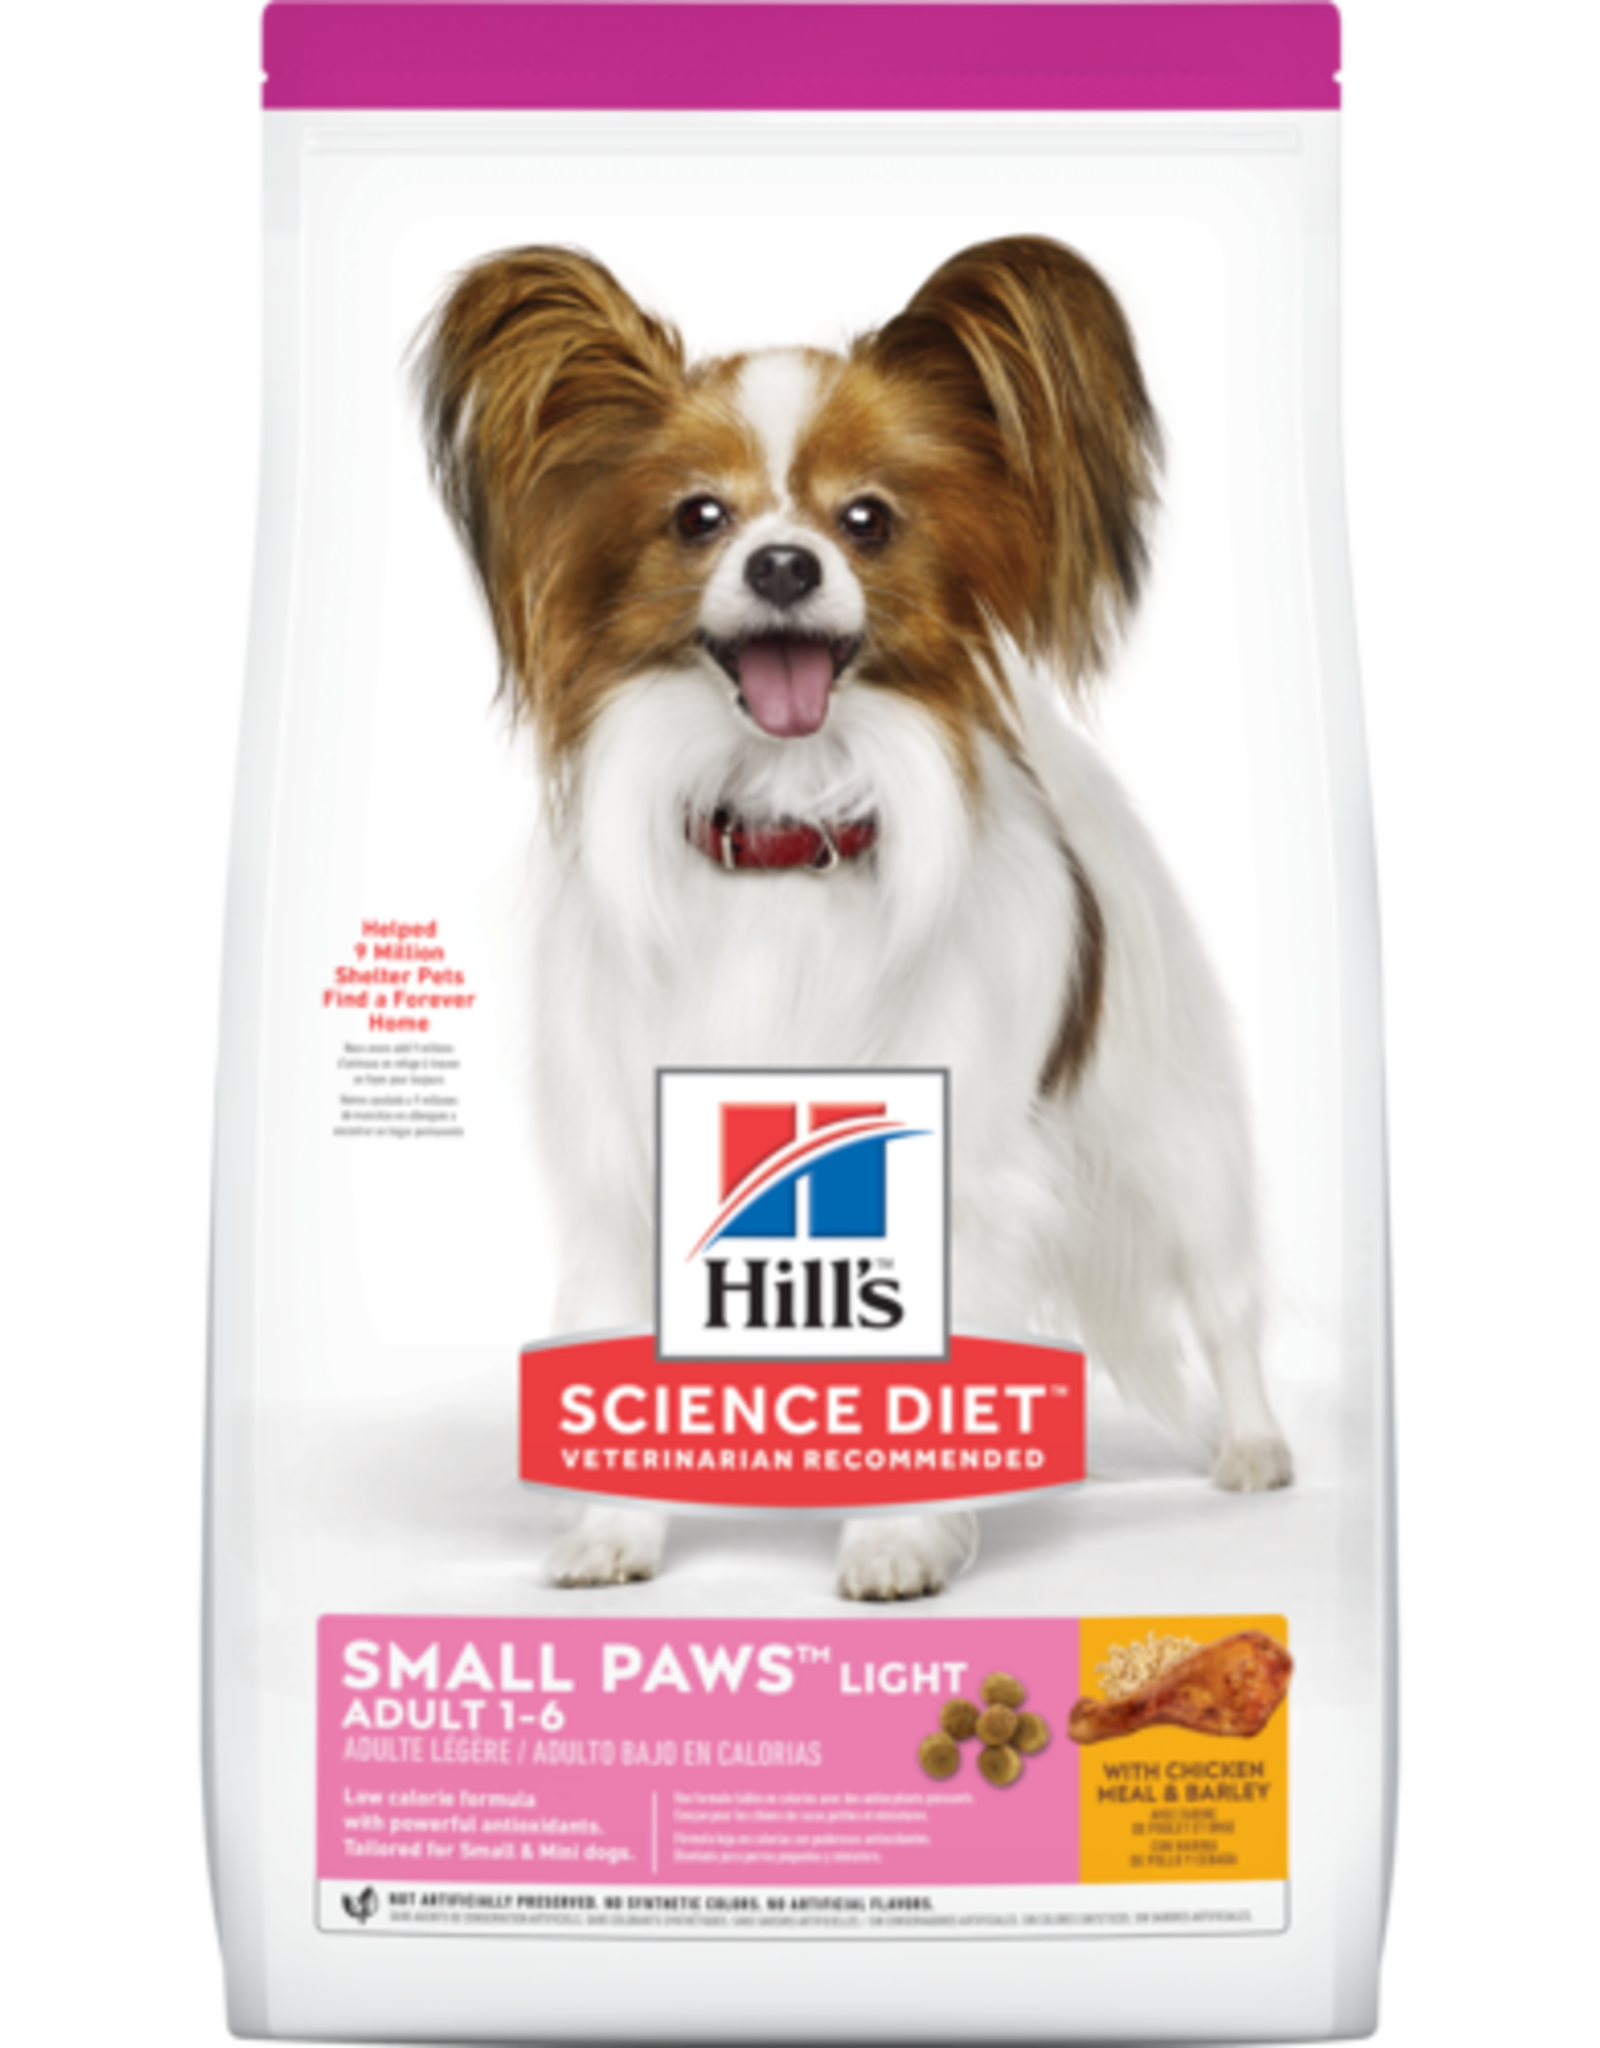 SCIENCE DIET HILL'S SCIENCE DIET CANINE ADULT SMALL PAWS LIGHT 15.5LBS